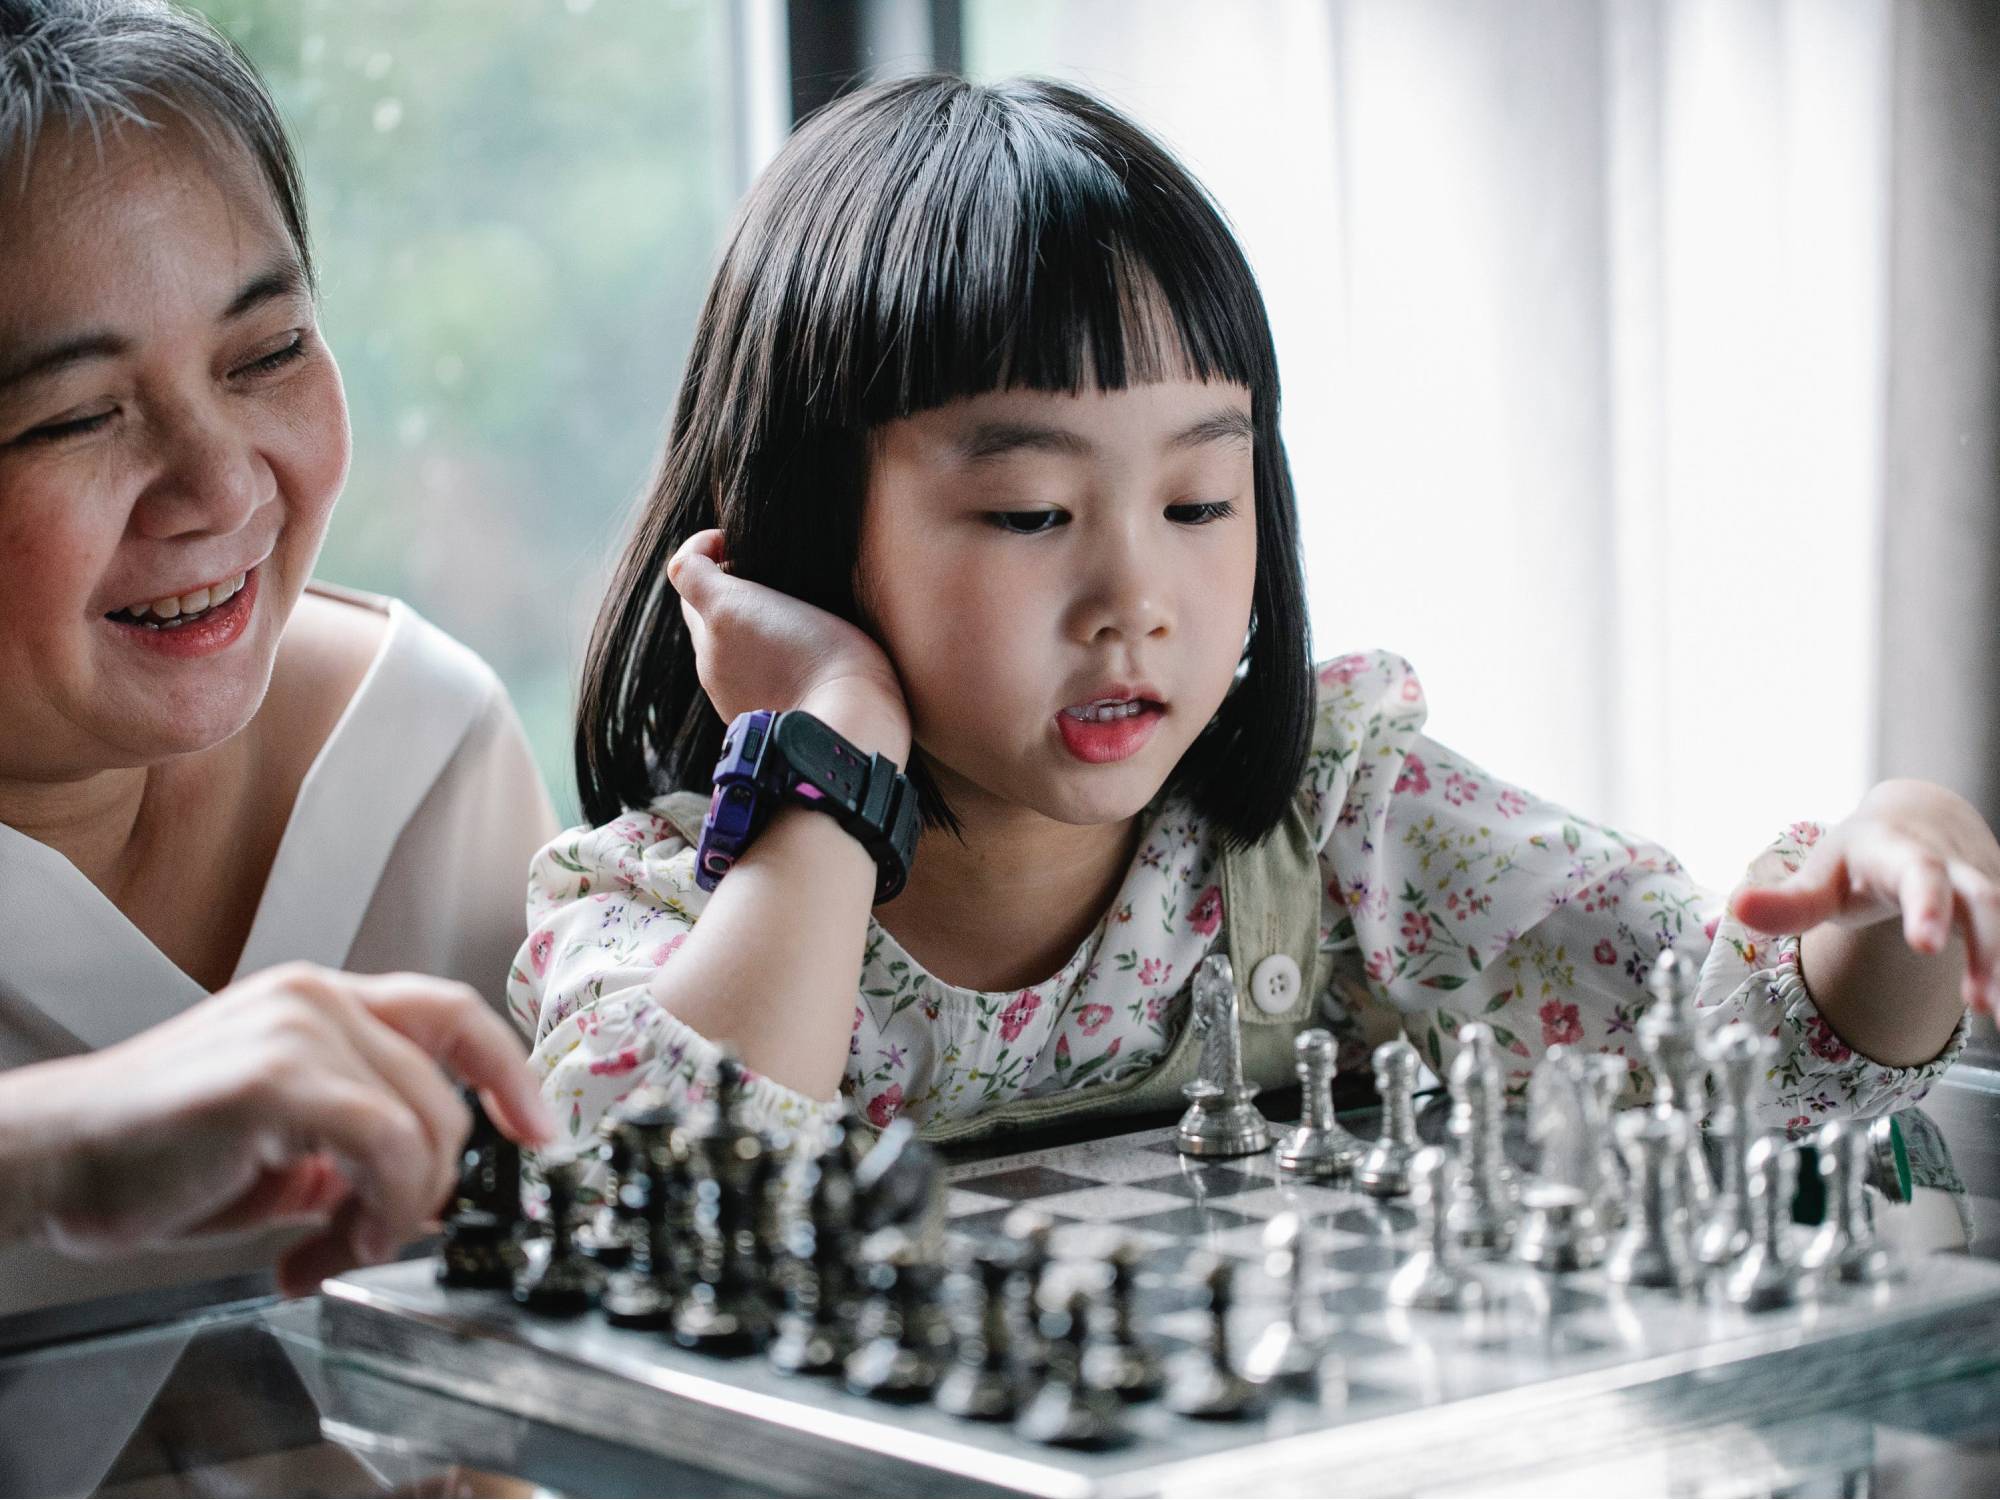 How to Teach your Child Chess When You Don't Know How to Play Yourself